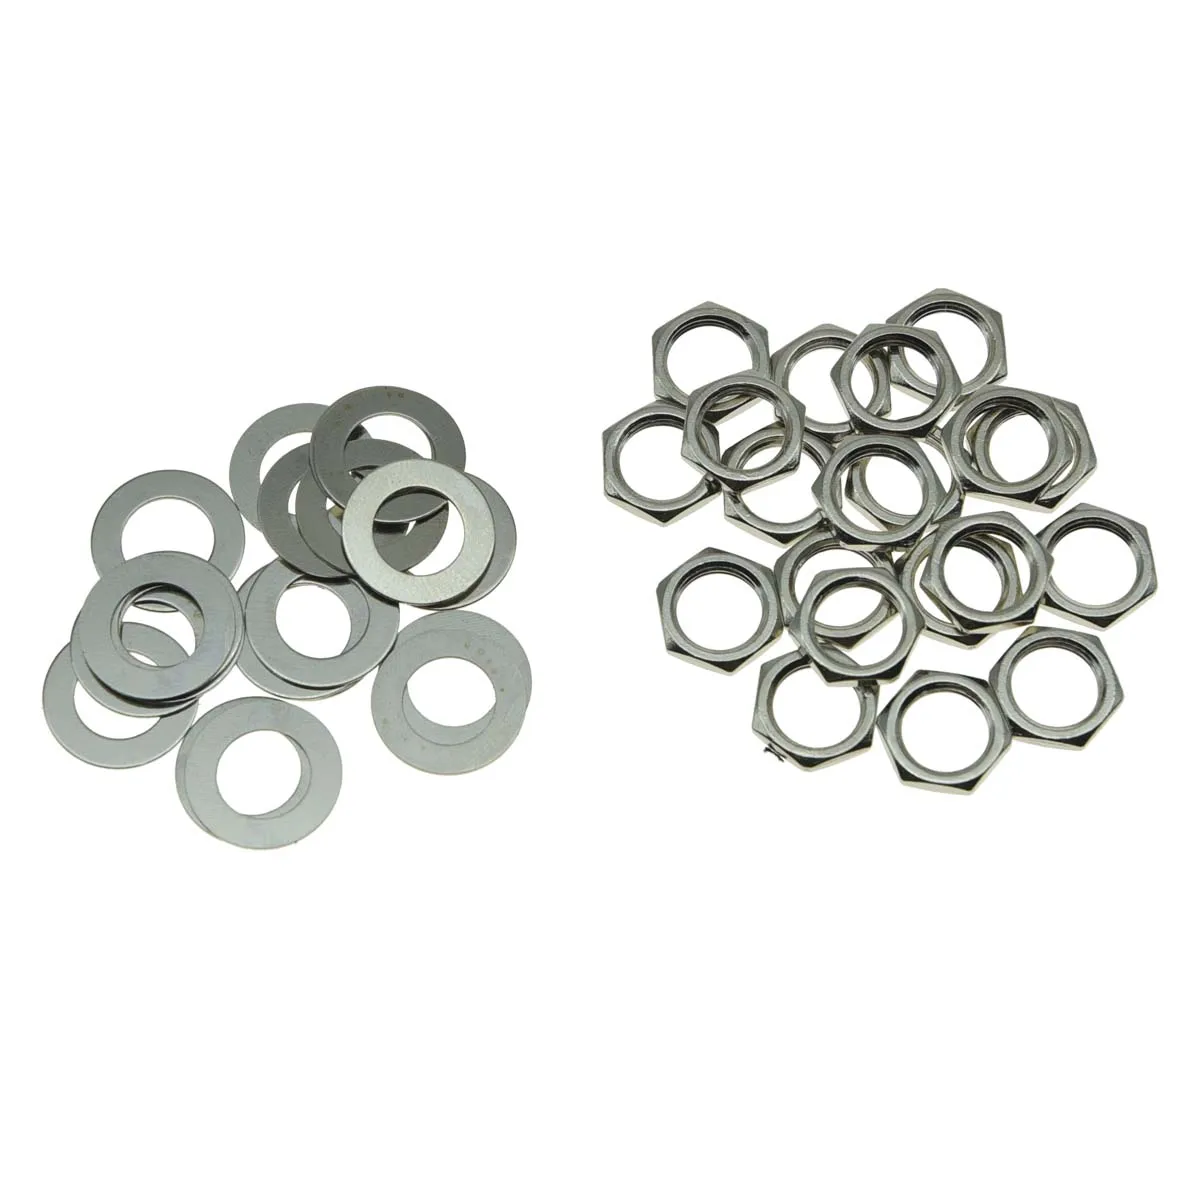 KAISH 20pcs US Thread 3/8" Guitar Pots Nuts Potentiometer Hex Nut and Washers for CTS Pots& Switchcraft Jacks Nickel